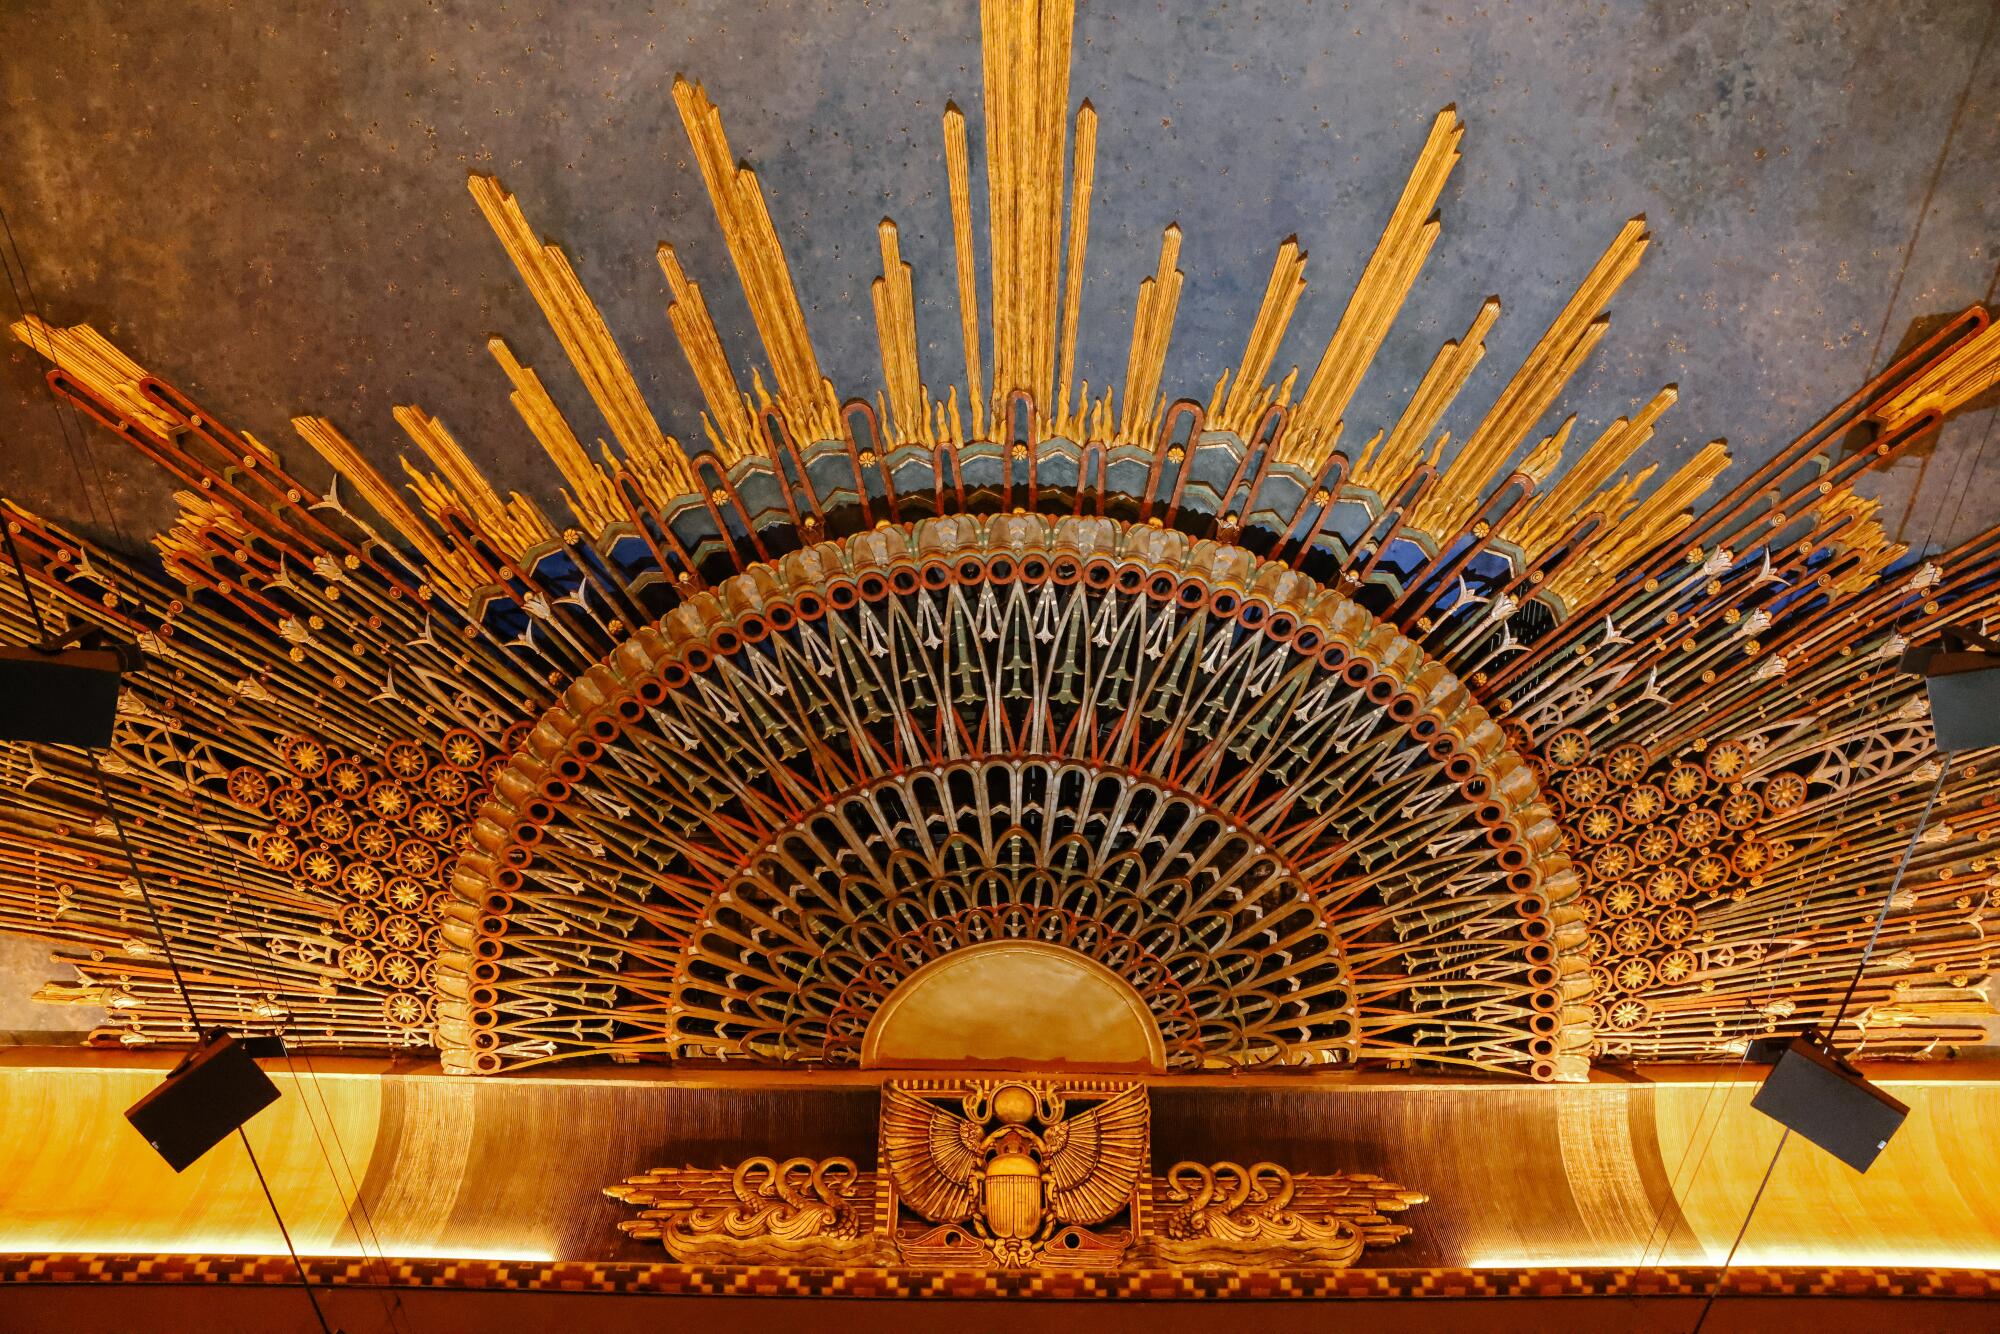 The original proscenium arch and ceiling featuring a scarab and sunburst.